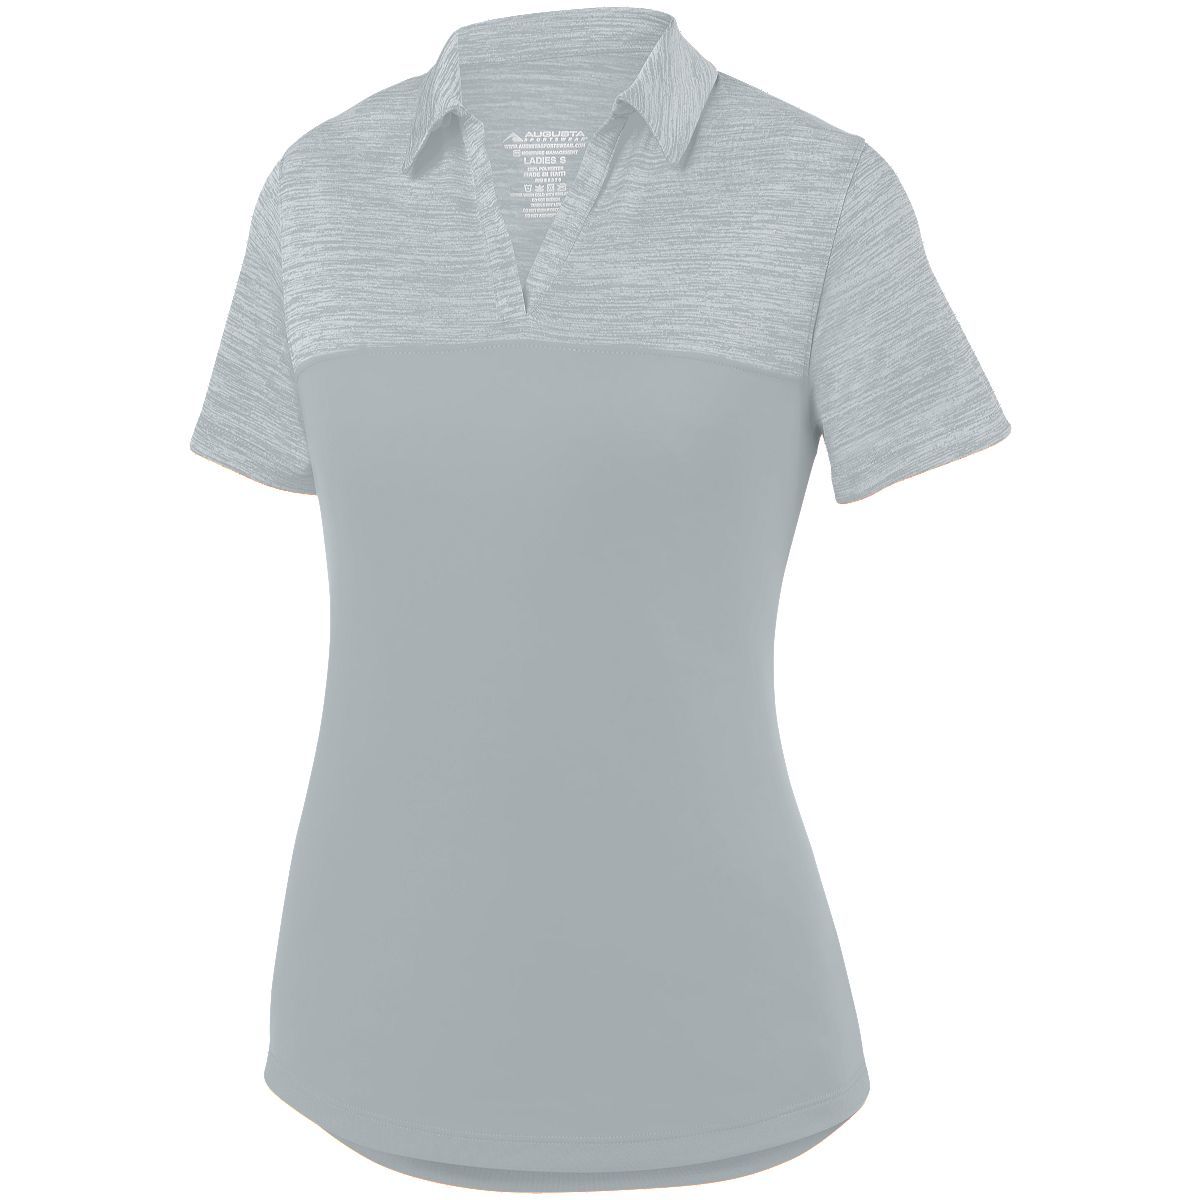 Augusta Sportswear Ladies Shadow Tonal Heather Polo in Silver  -Part of the Ladies, Ladies-Polo, Polos, Augusta-Products, Shirts, Tonal-Fleece-Collection product lines at KanaleyCreations.com